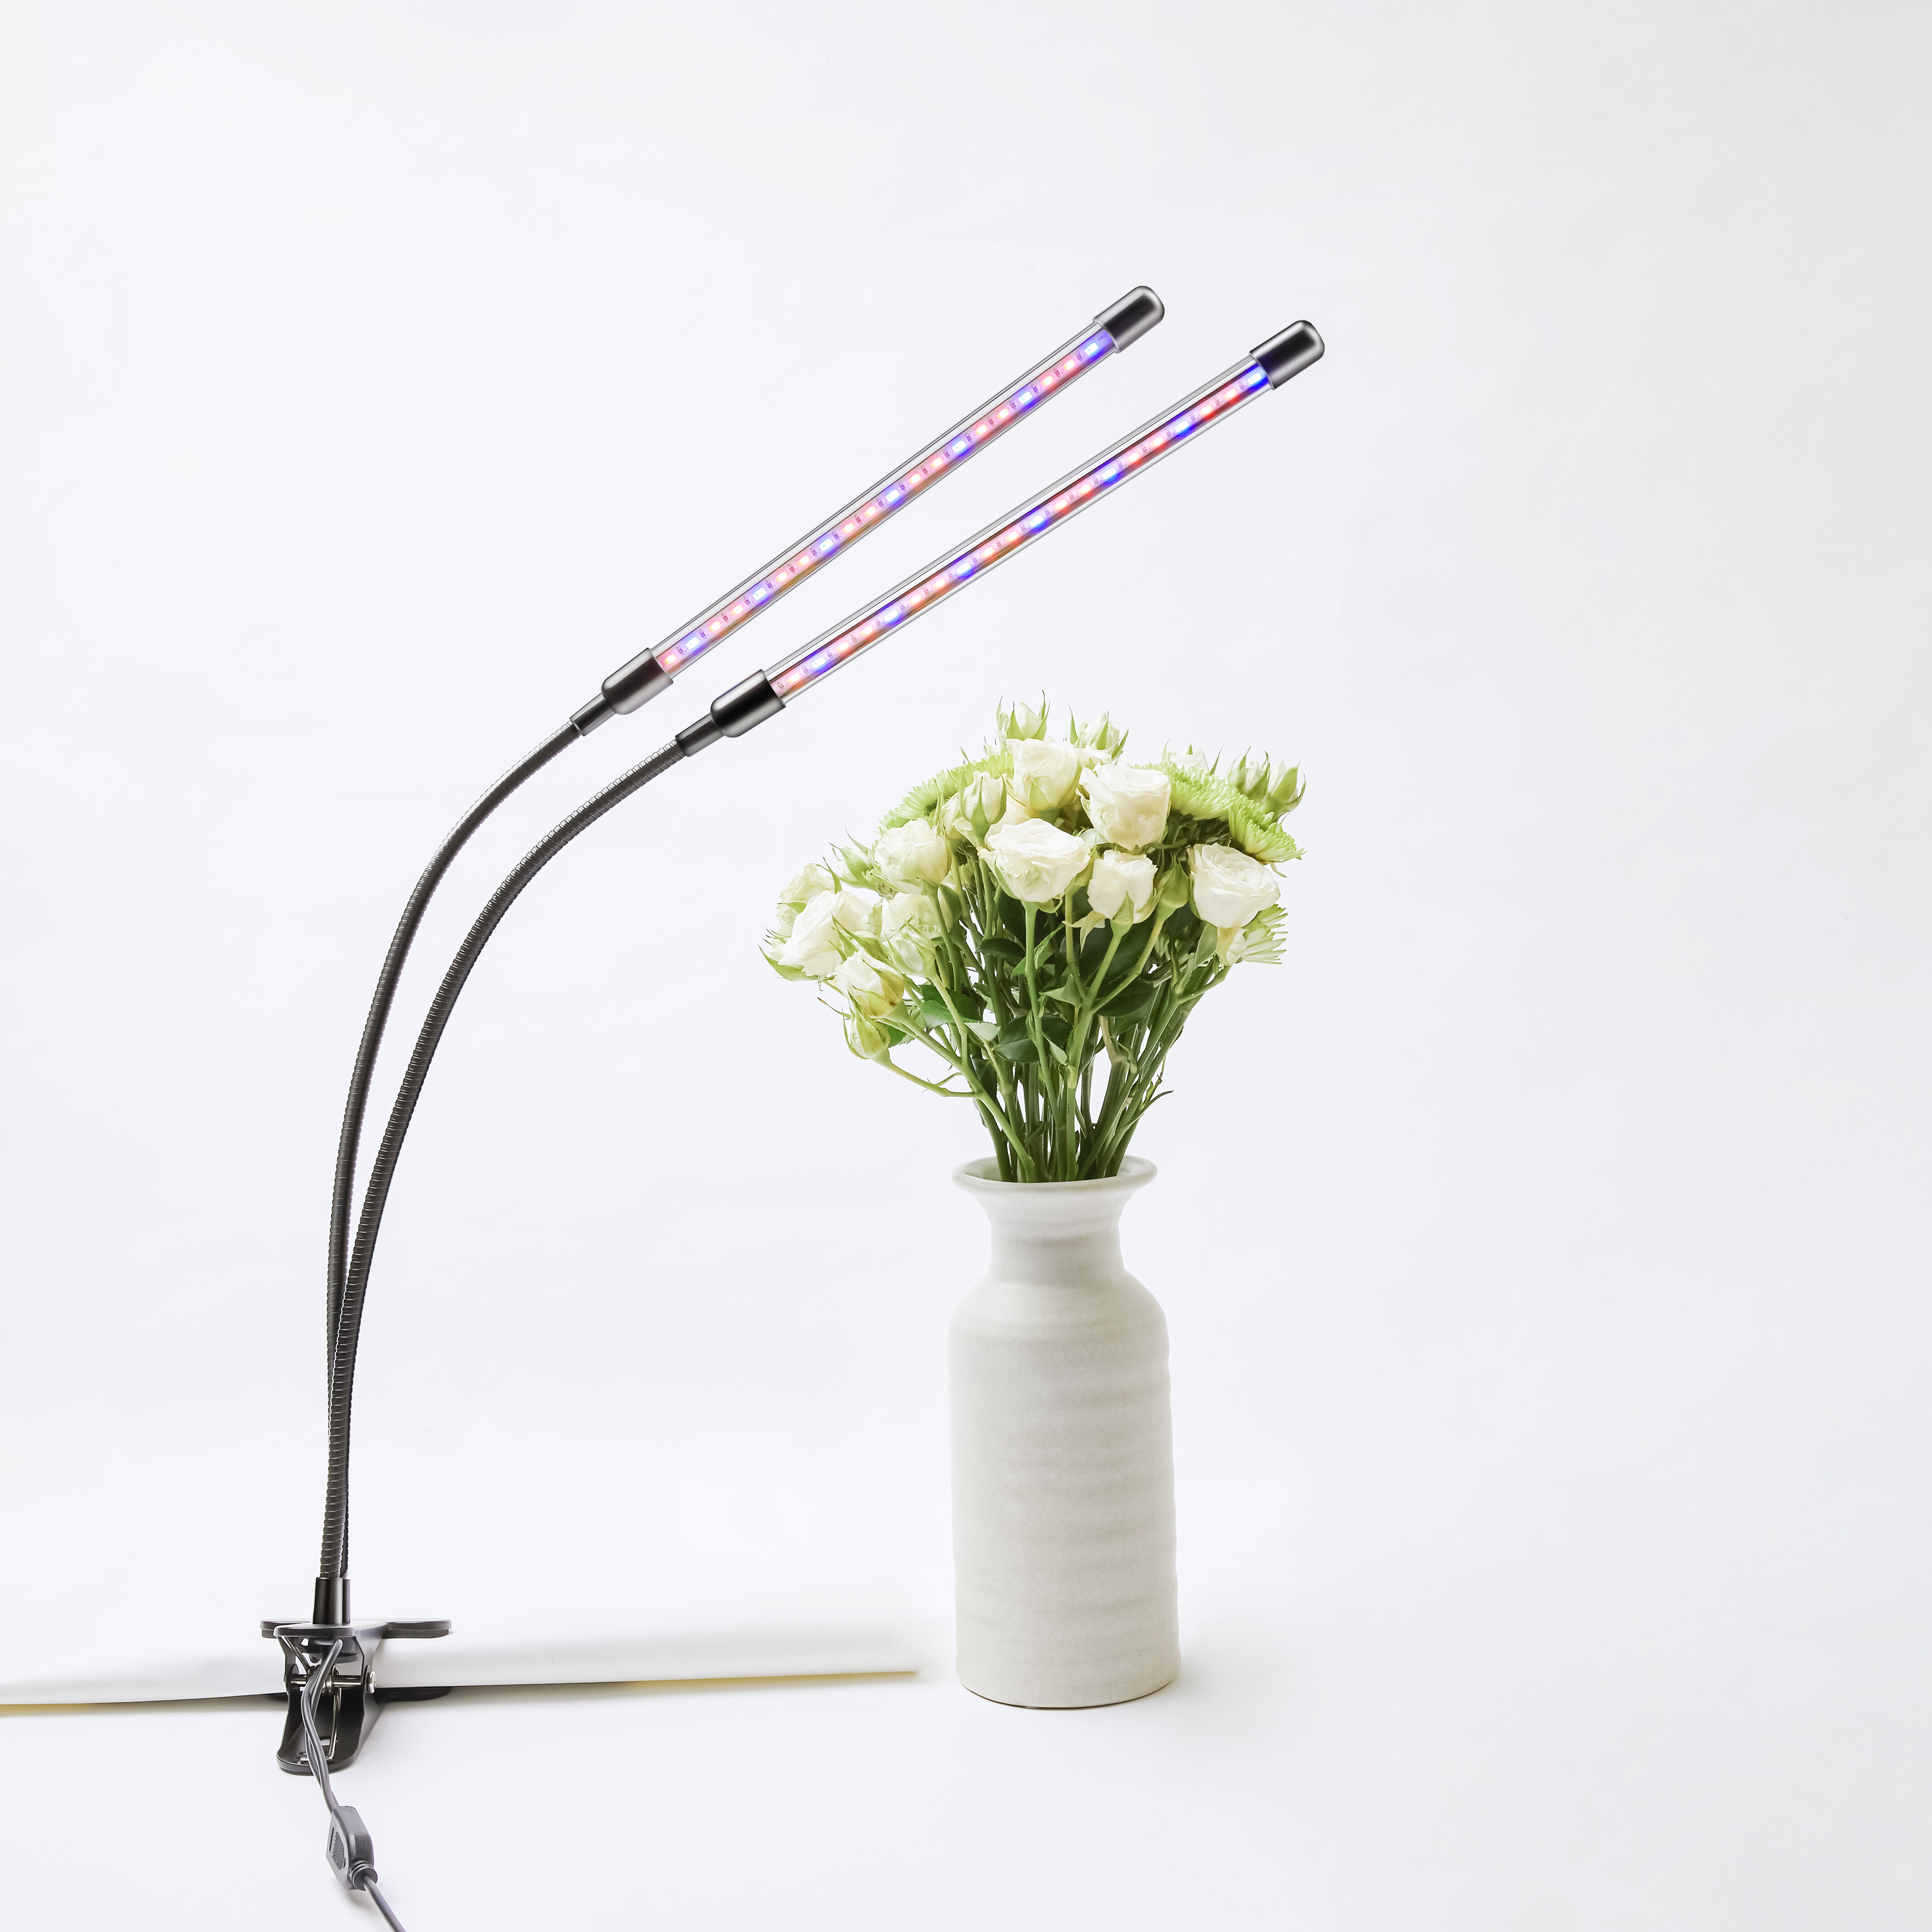 LED Grow Light Plant Growing Lamp Lights with Clip For Indoor Plants S7B2